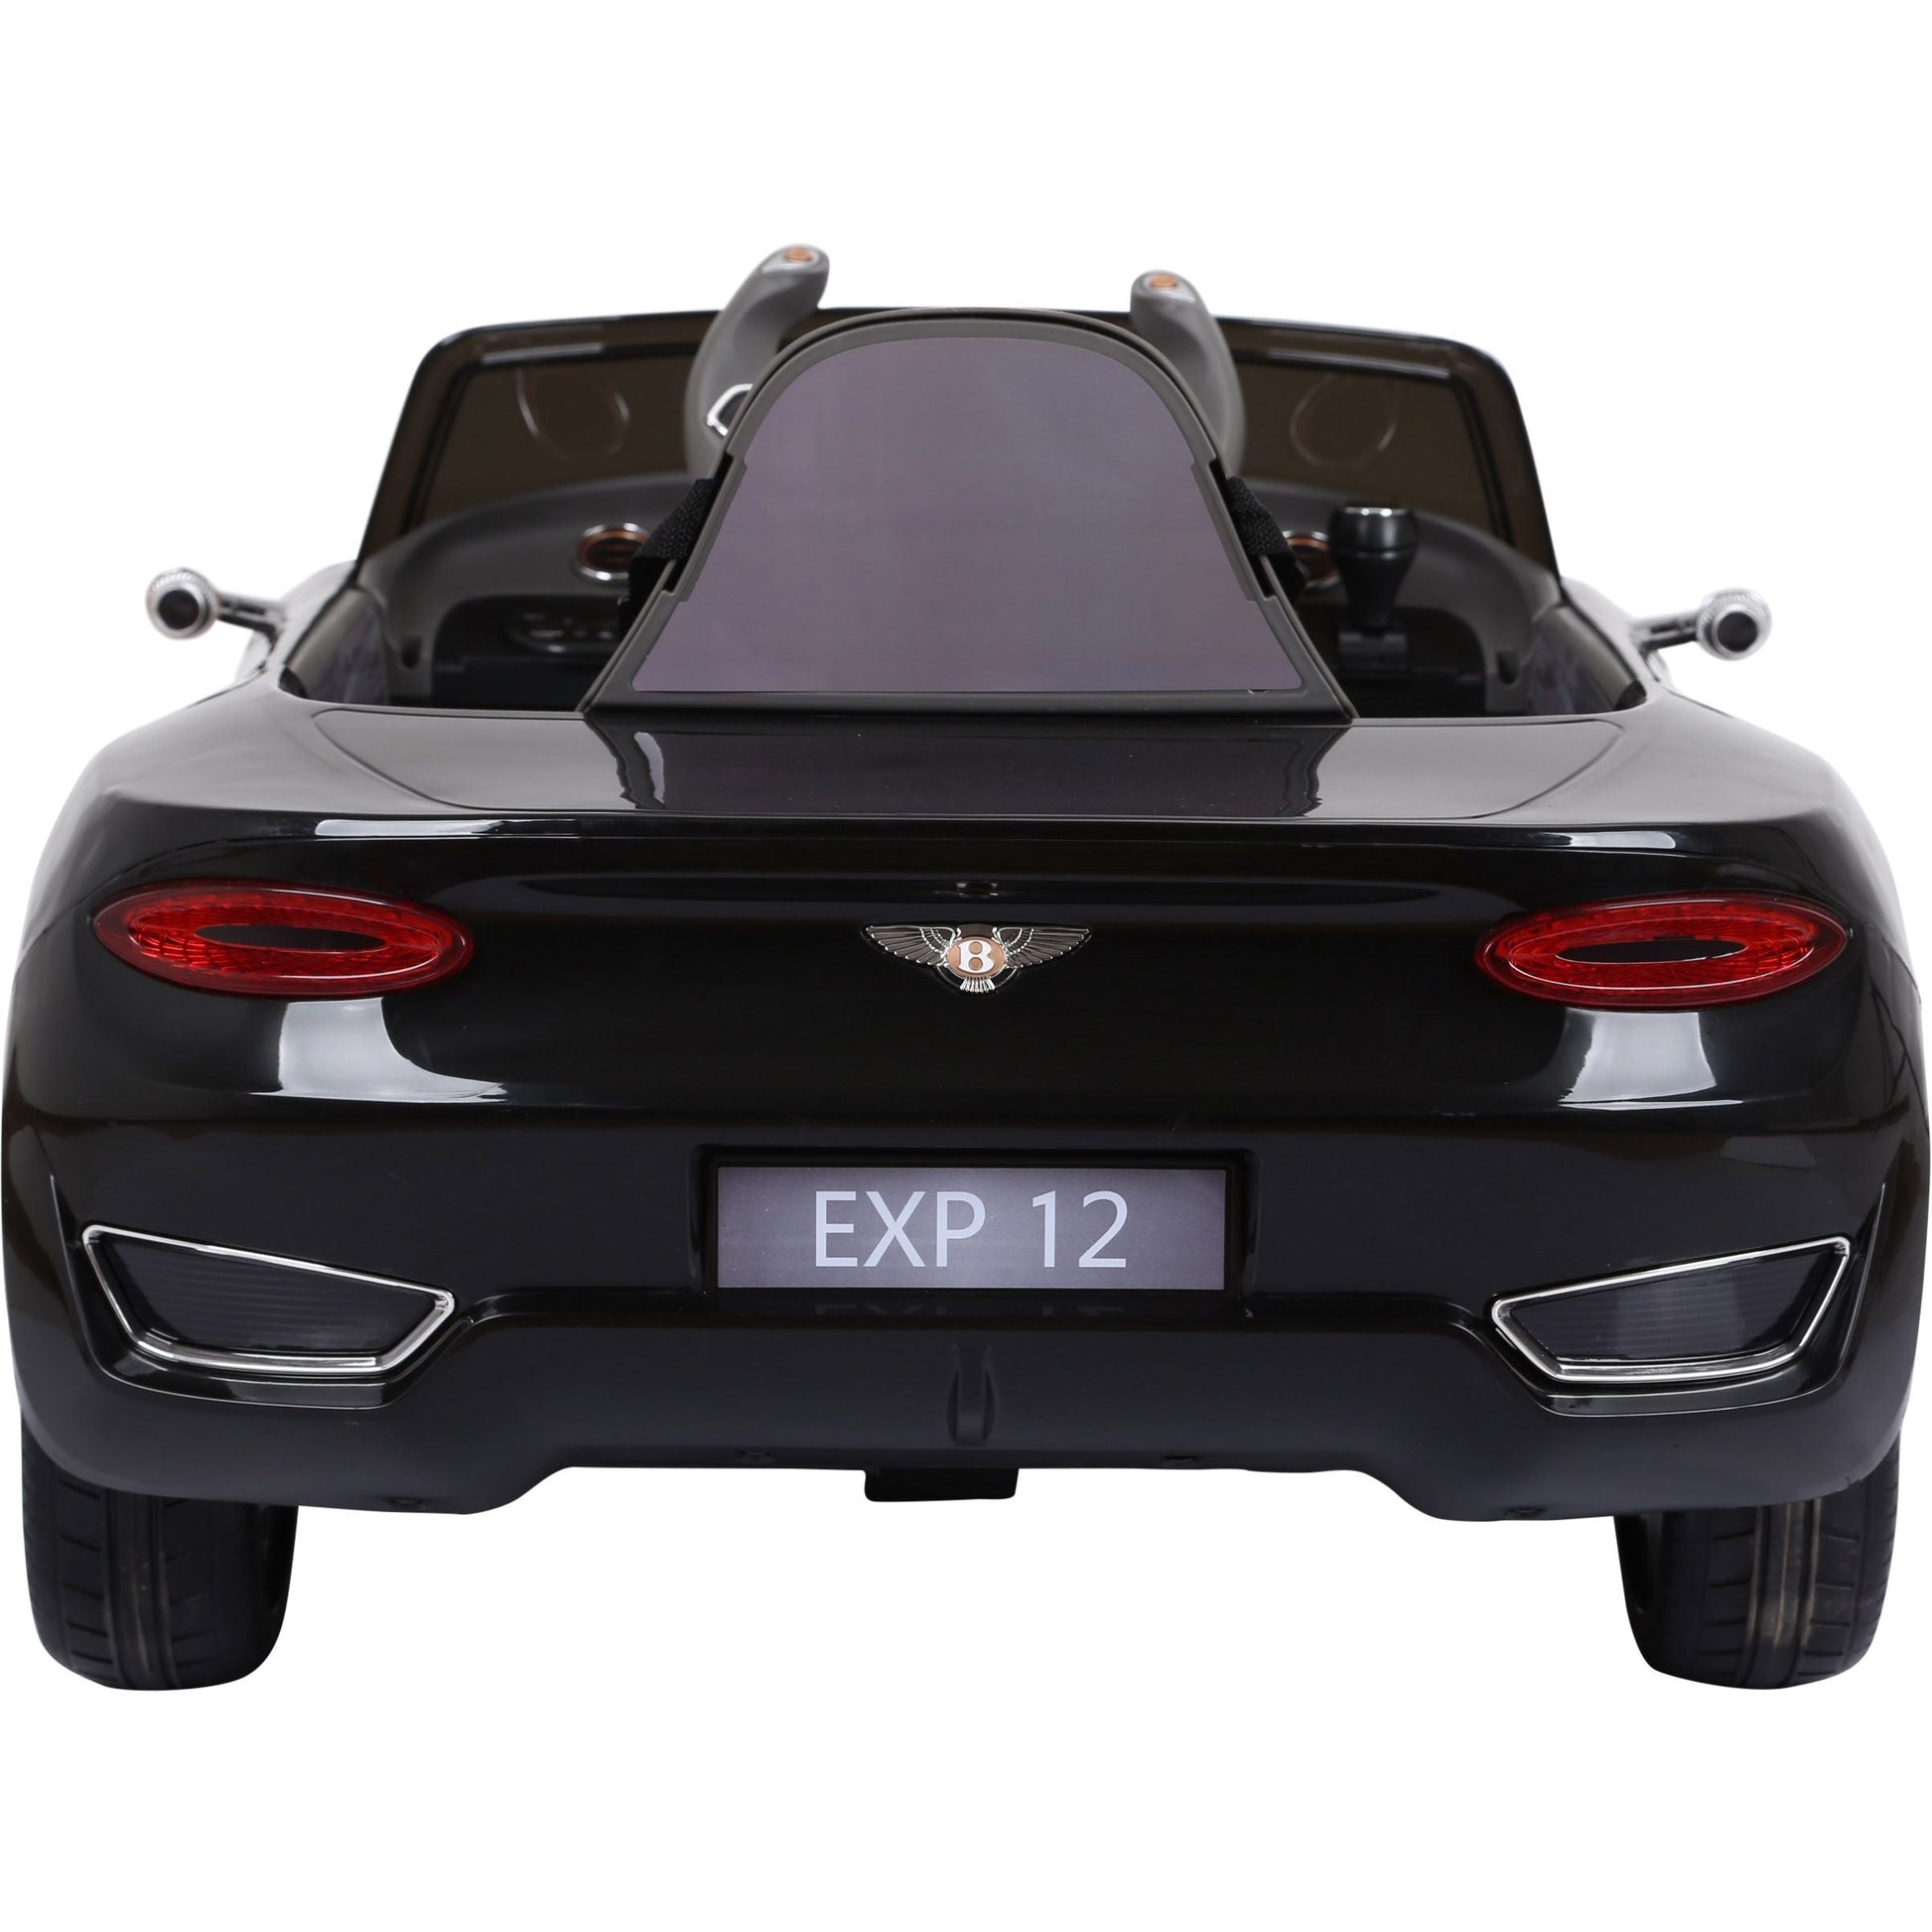 Black Bentley GT EXP12 electric ride on car for kids with license plate 'exp 12', rear view.